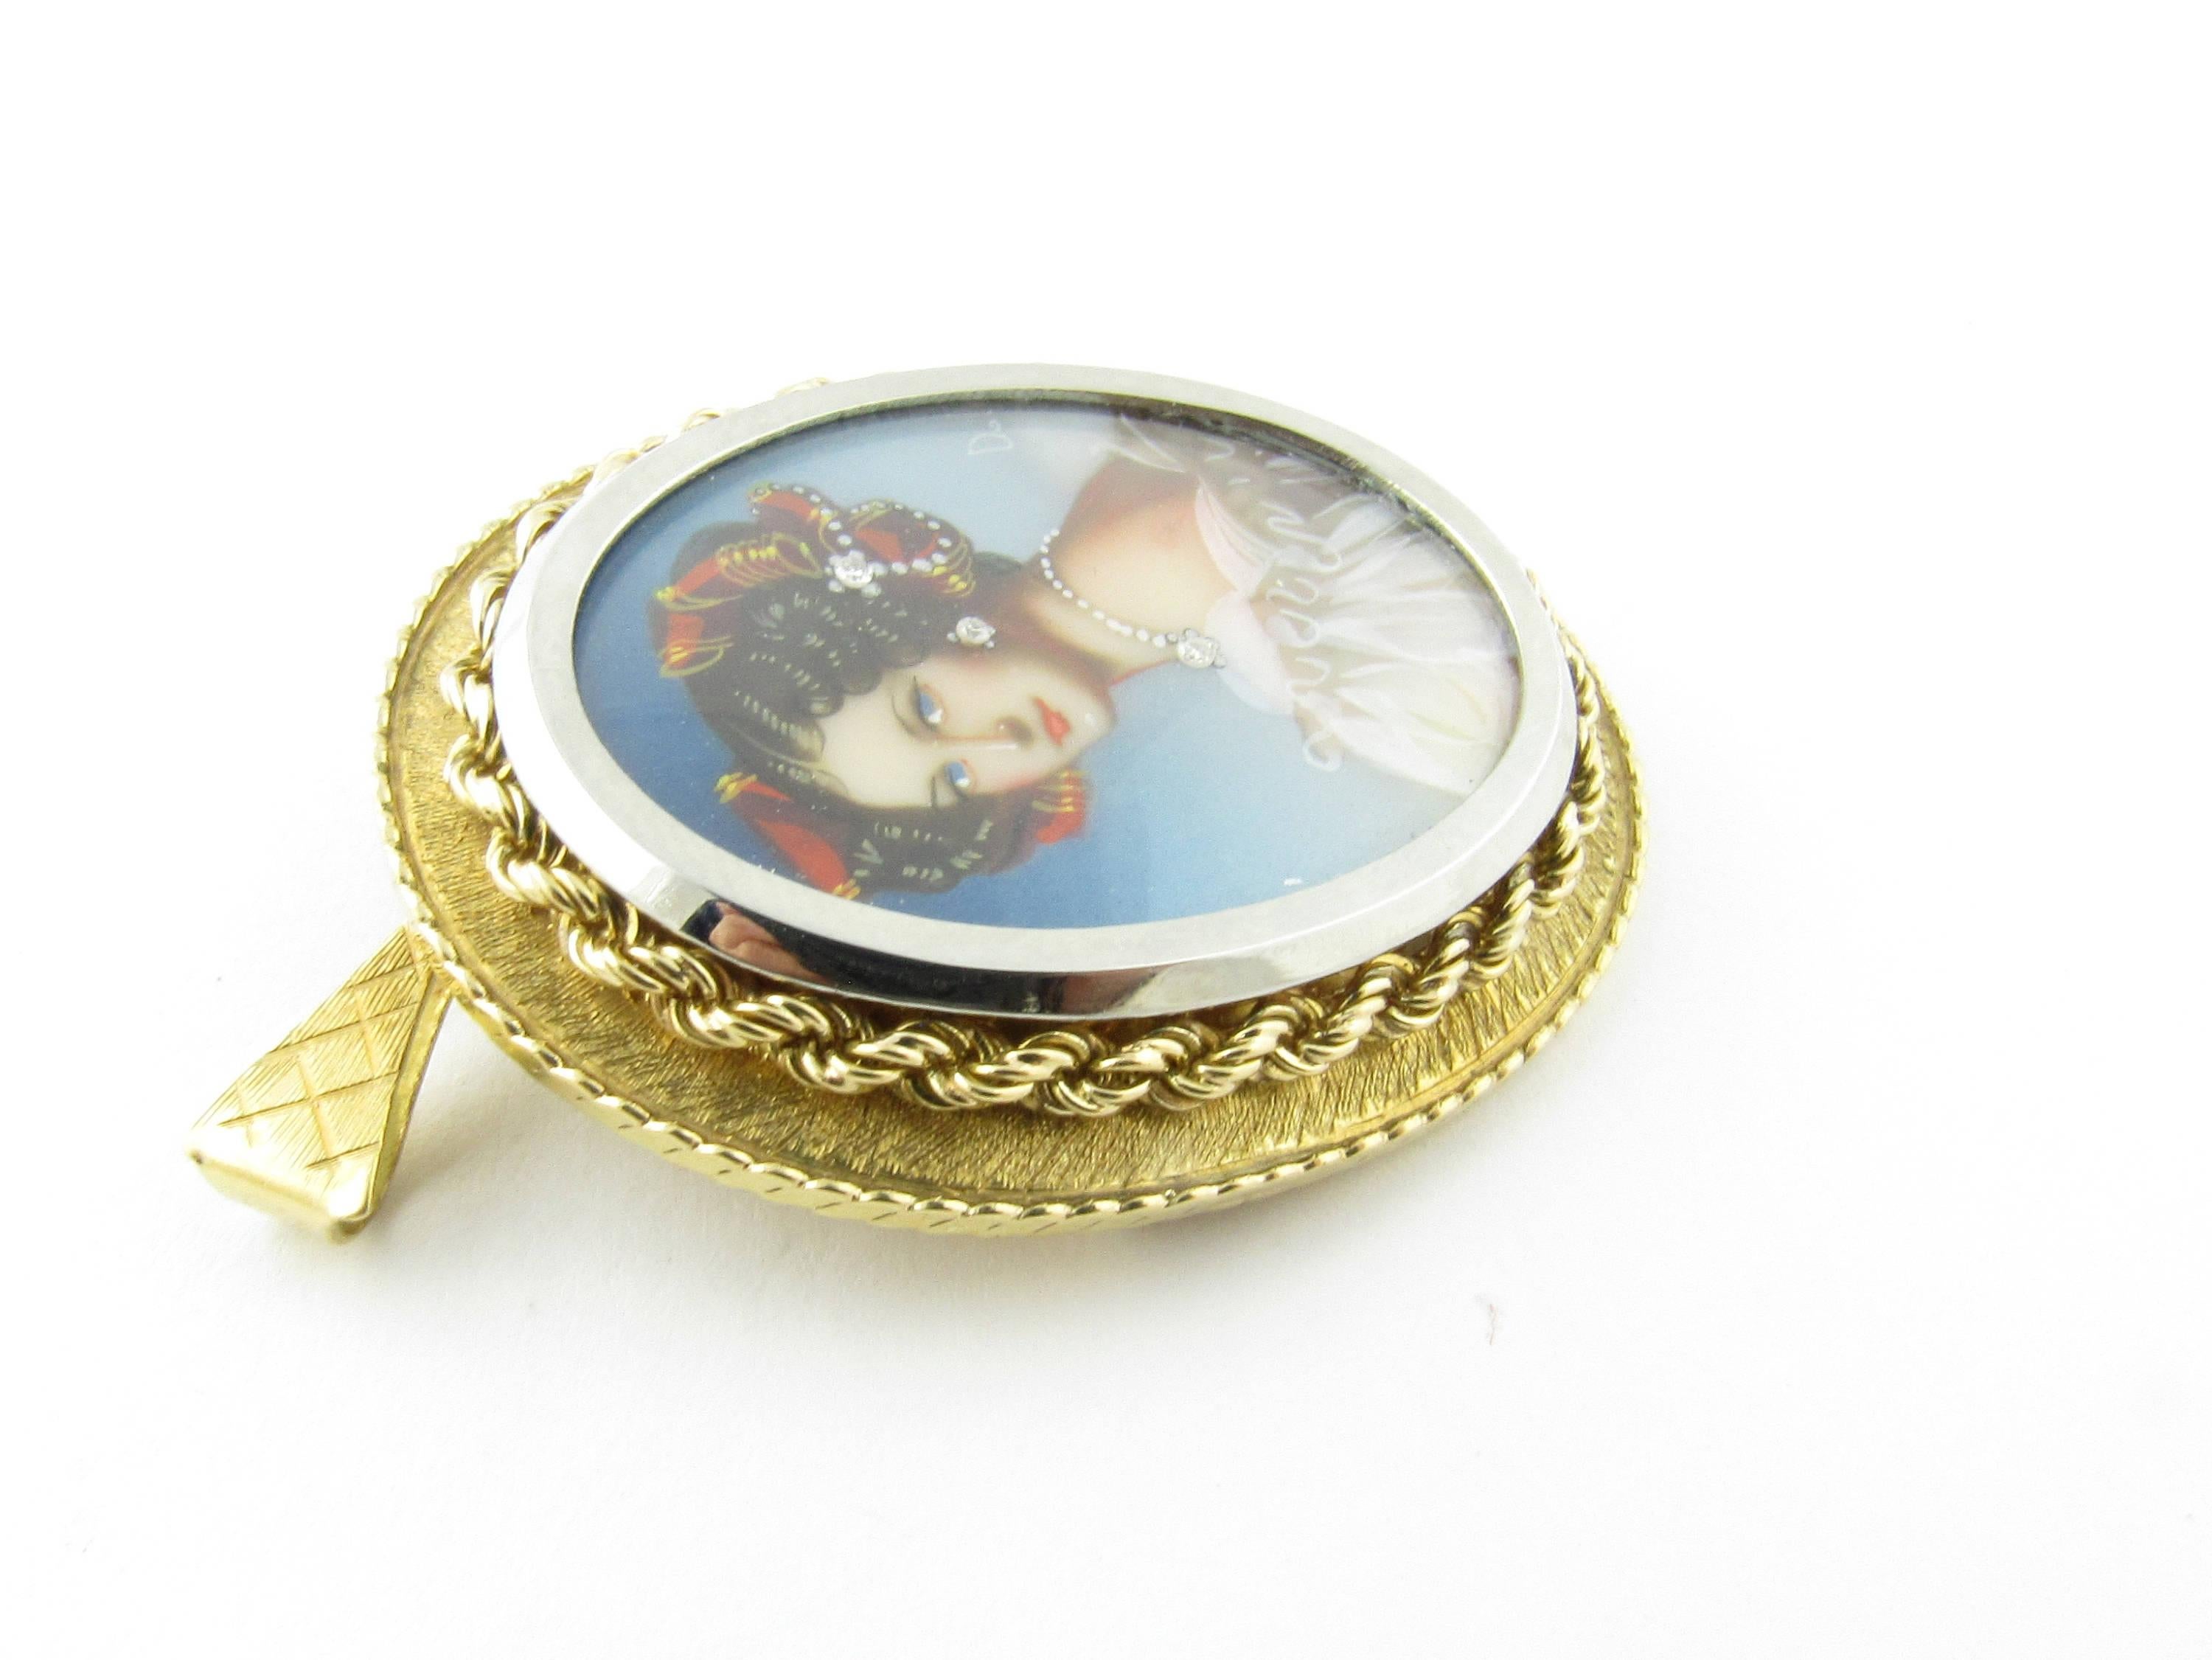 Vintage 18 Karat Yellow Gold Cameo Pendant/Brooch

This spectacular painted cameo features a portrait of a lovely lady framed in meticulously detailed 18K yellow gold. Three gemstones sparkle from her necklace, hair bow and earring.

Can be worn as